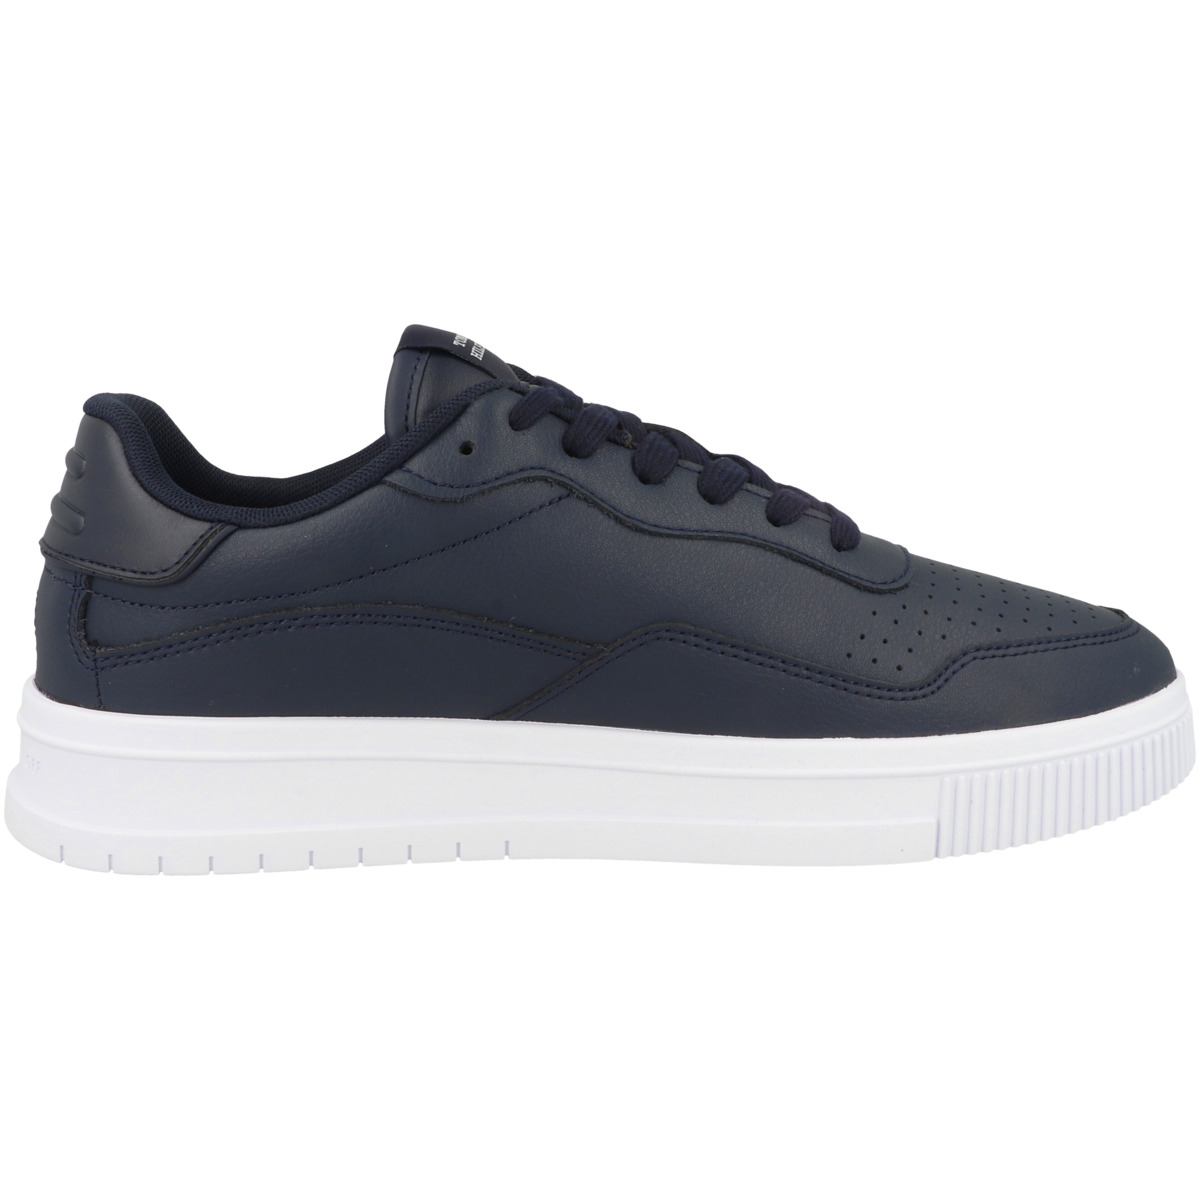 Tommy Hilfiger Supercup Leather Stripes Sneaker low